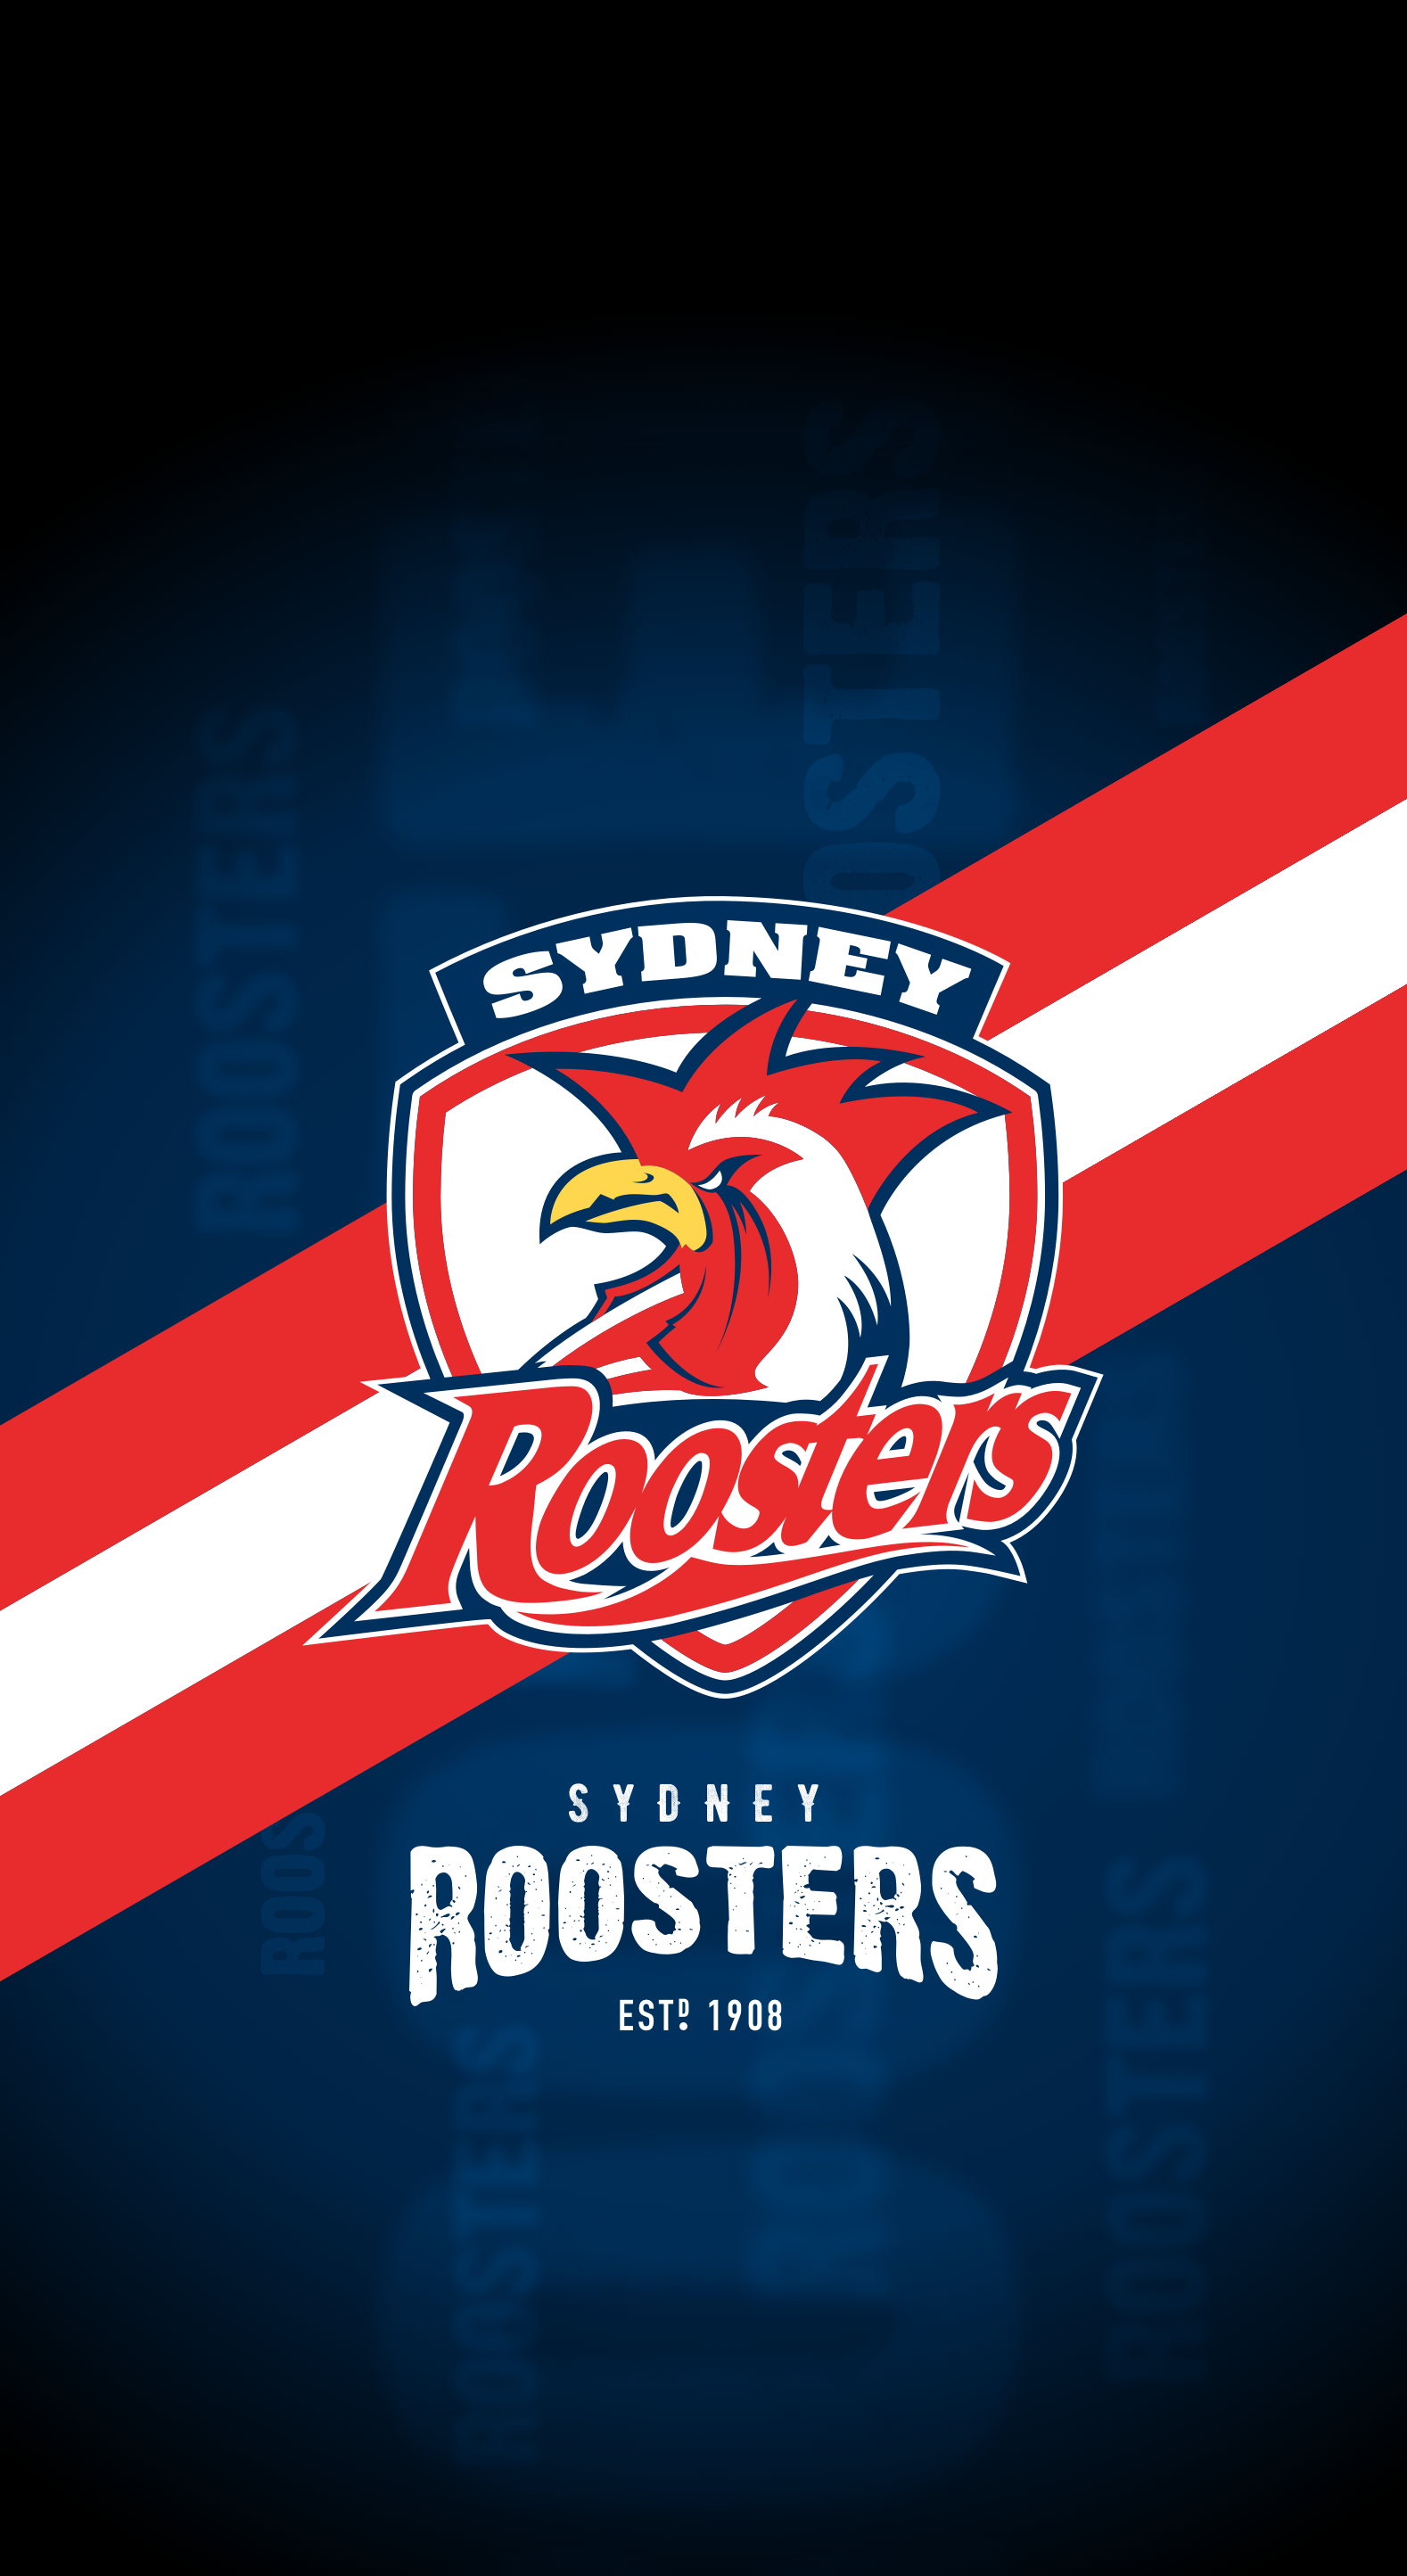 All sizes. Sydney Roosters iPhone X Lock Screen Wallpaper